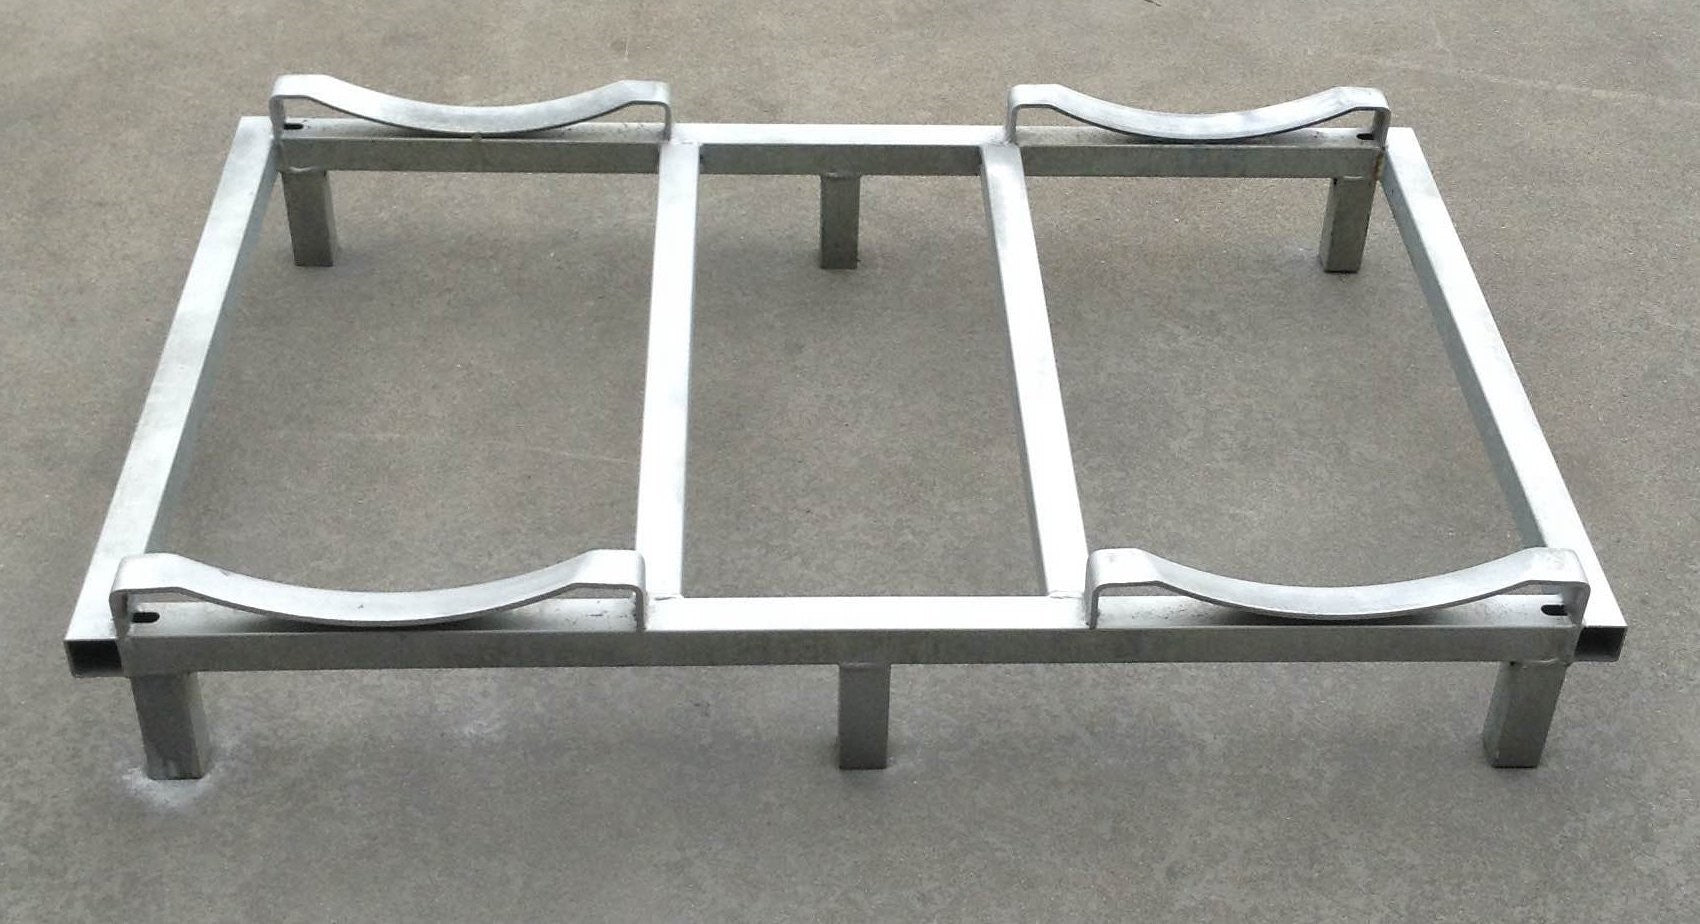 Galvanized iron rack for barriques